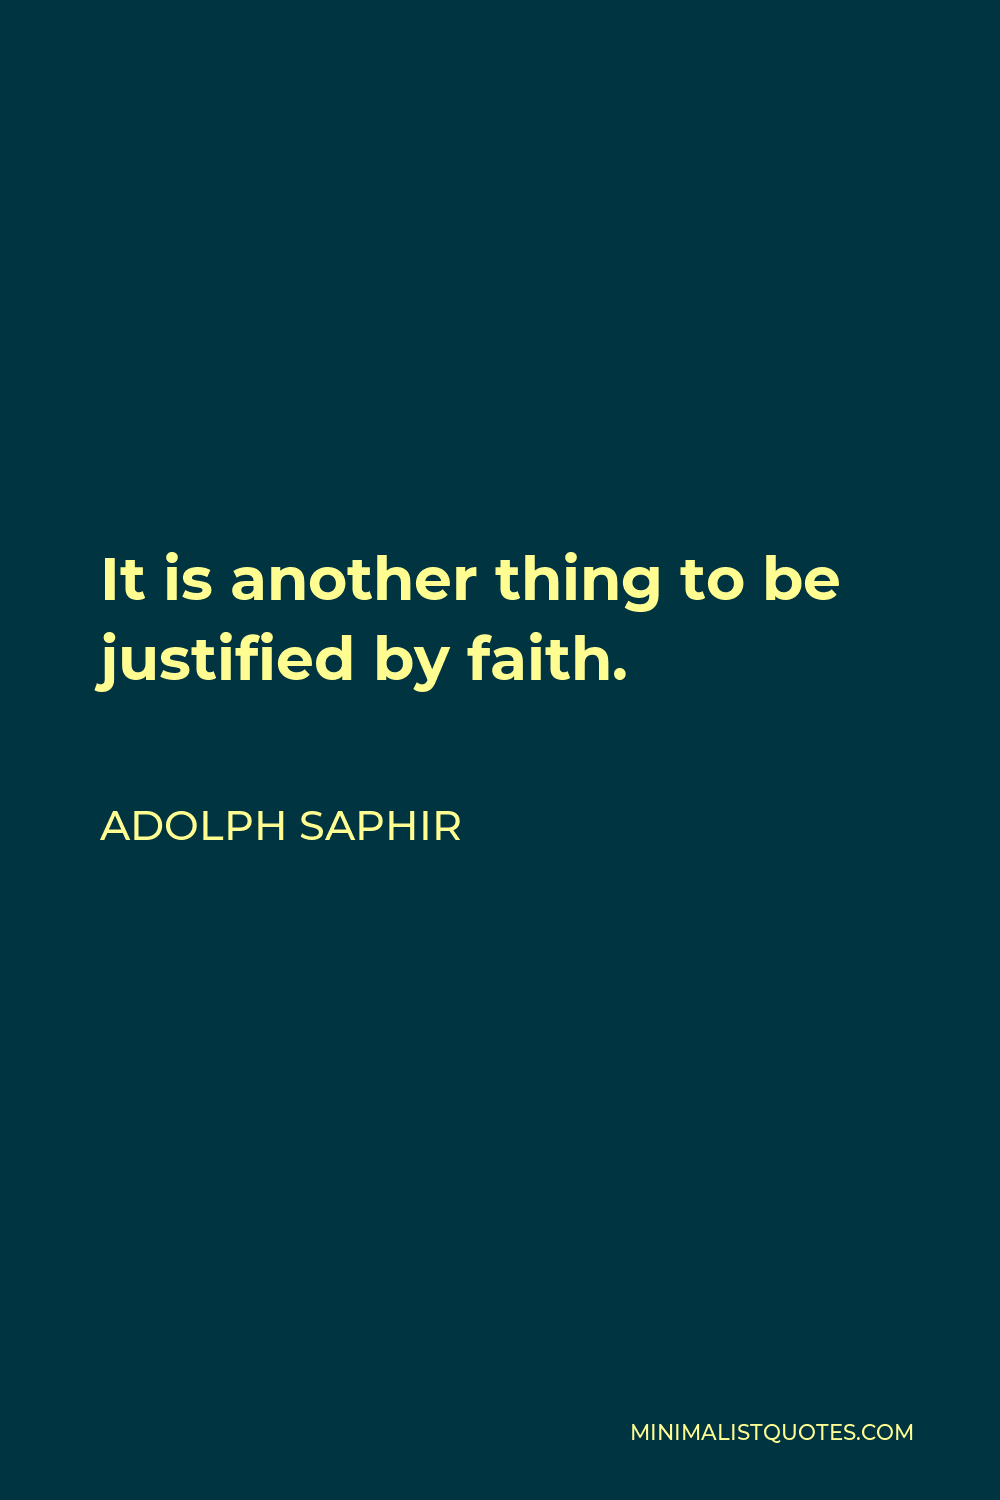 Adolph Saphir Quote - It is another thing to be justified by faith.